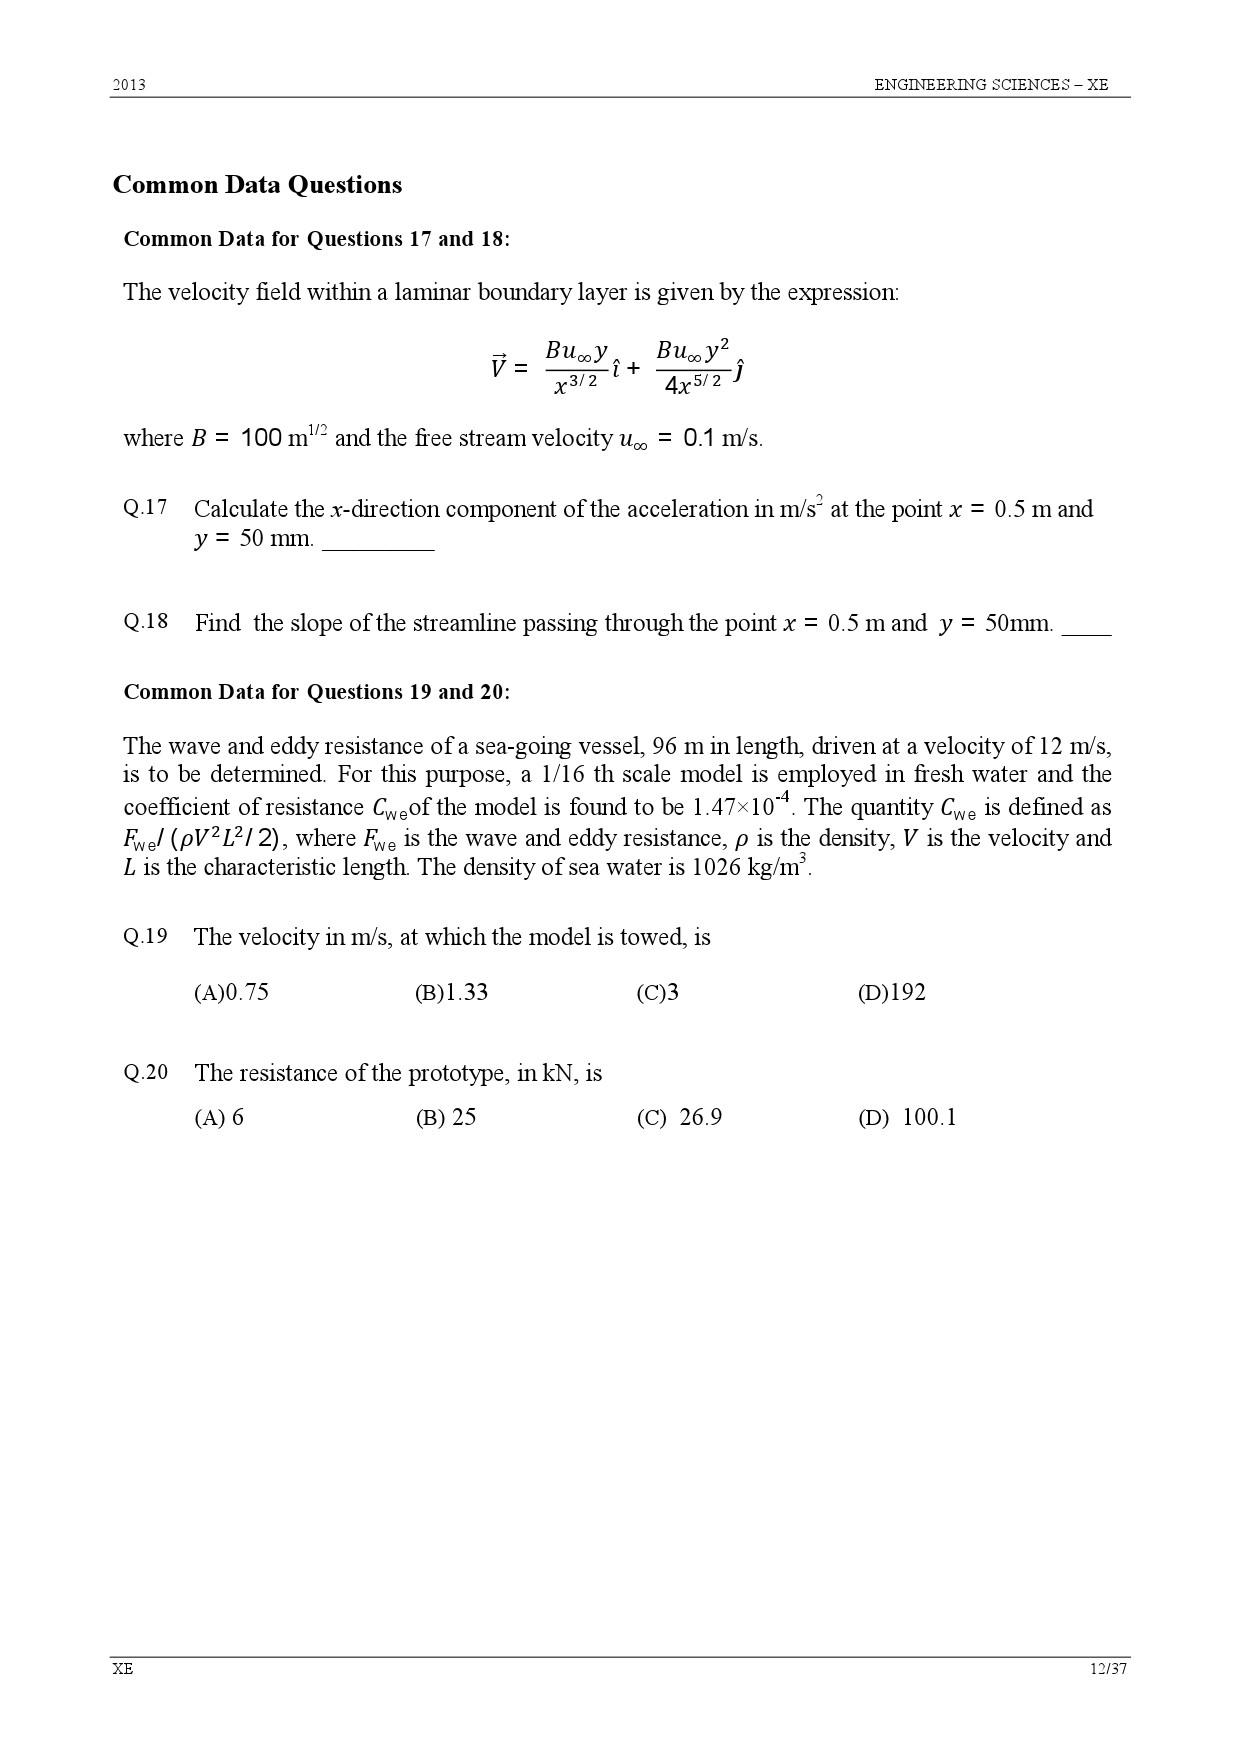 GATE Exam Question Paper 2013 Engineering Sciences 12